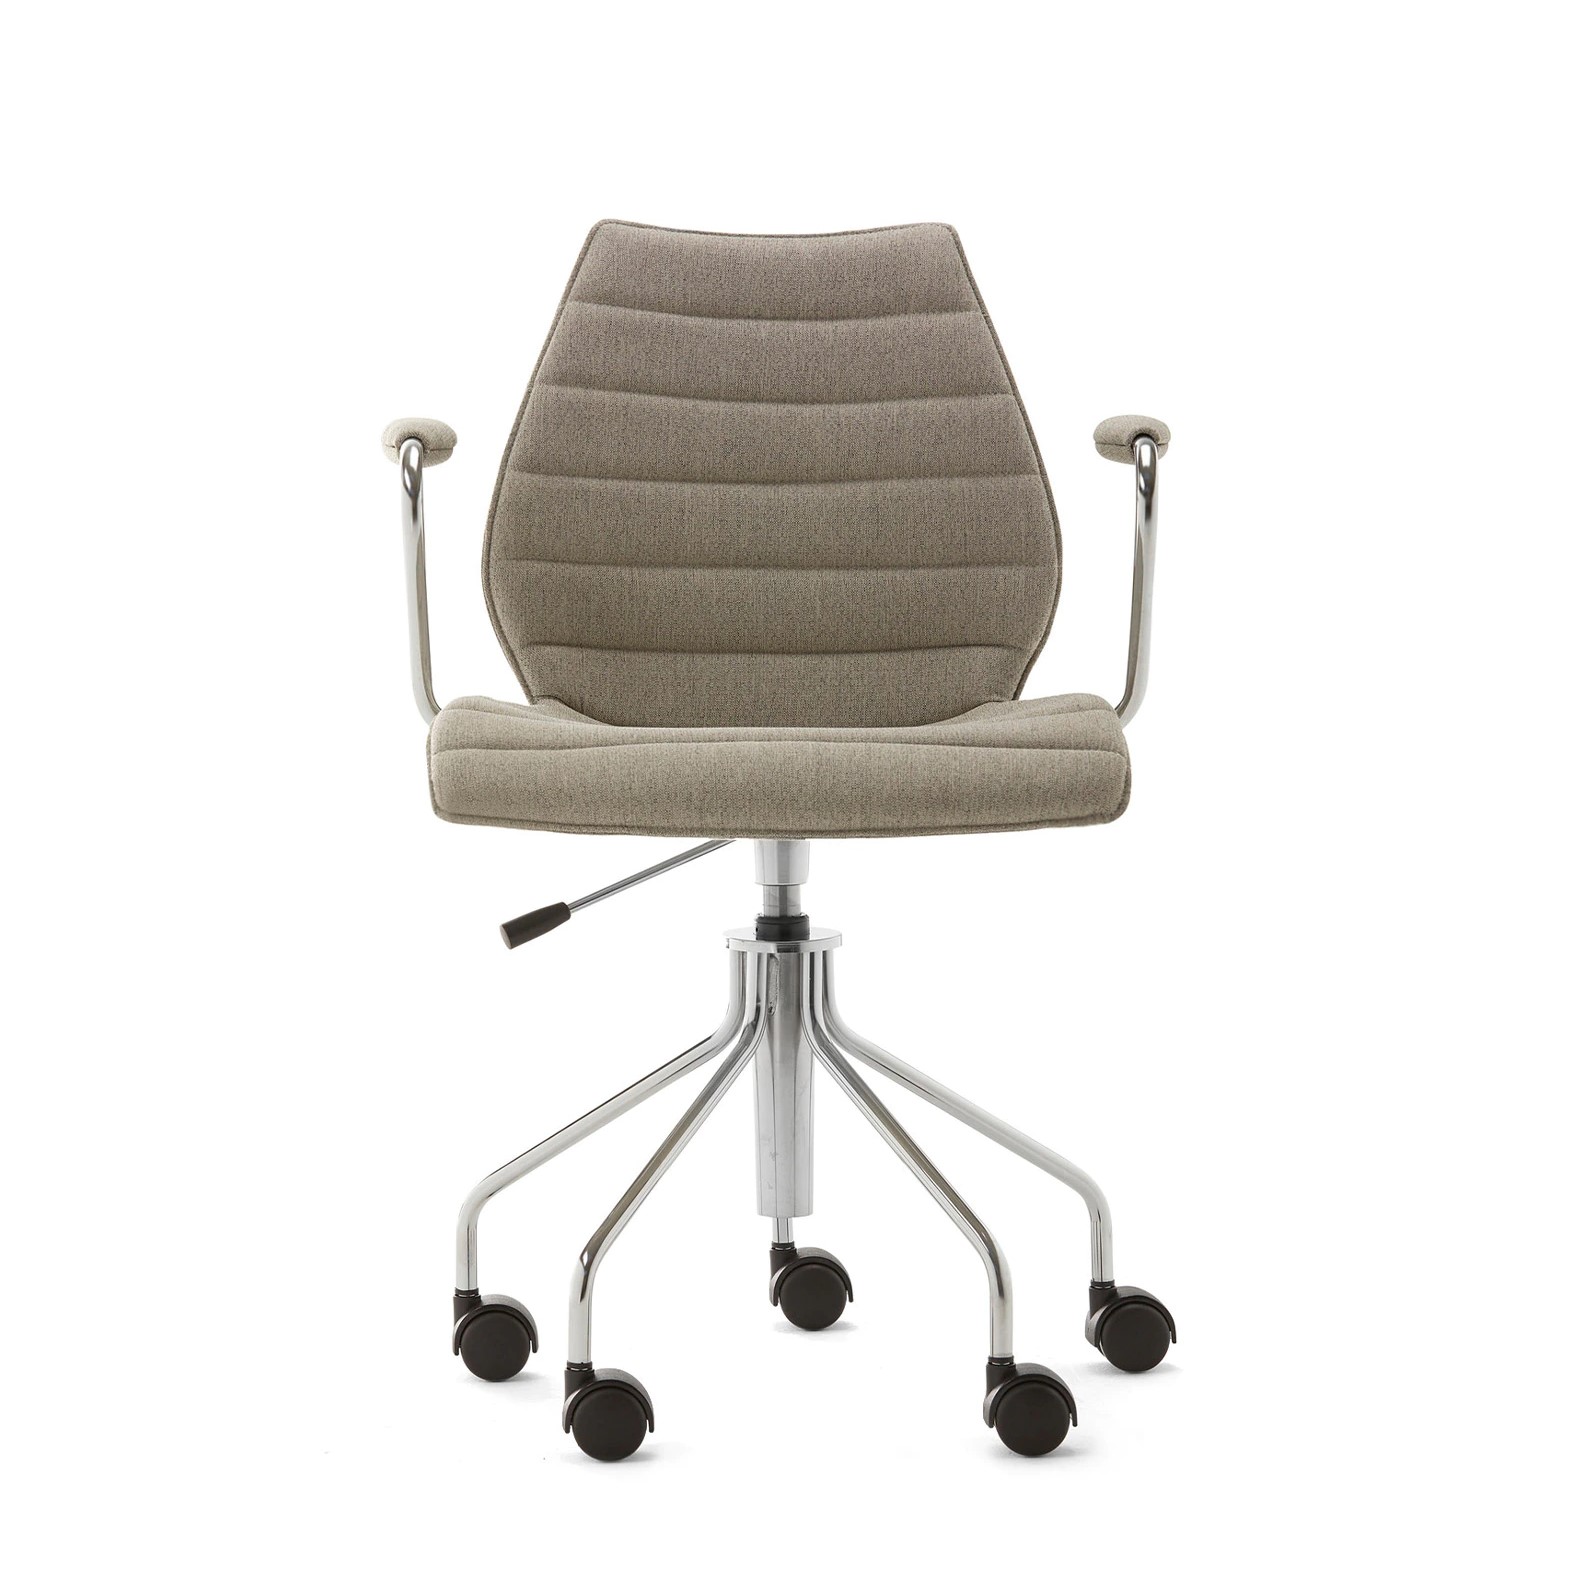 MAUI SOFT NOMA swivel chair with arms